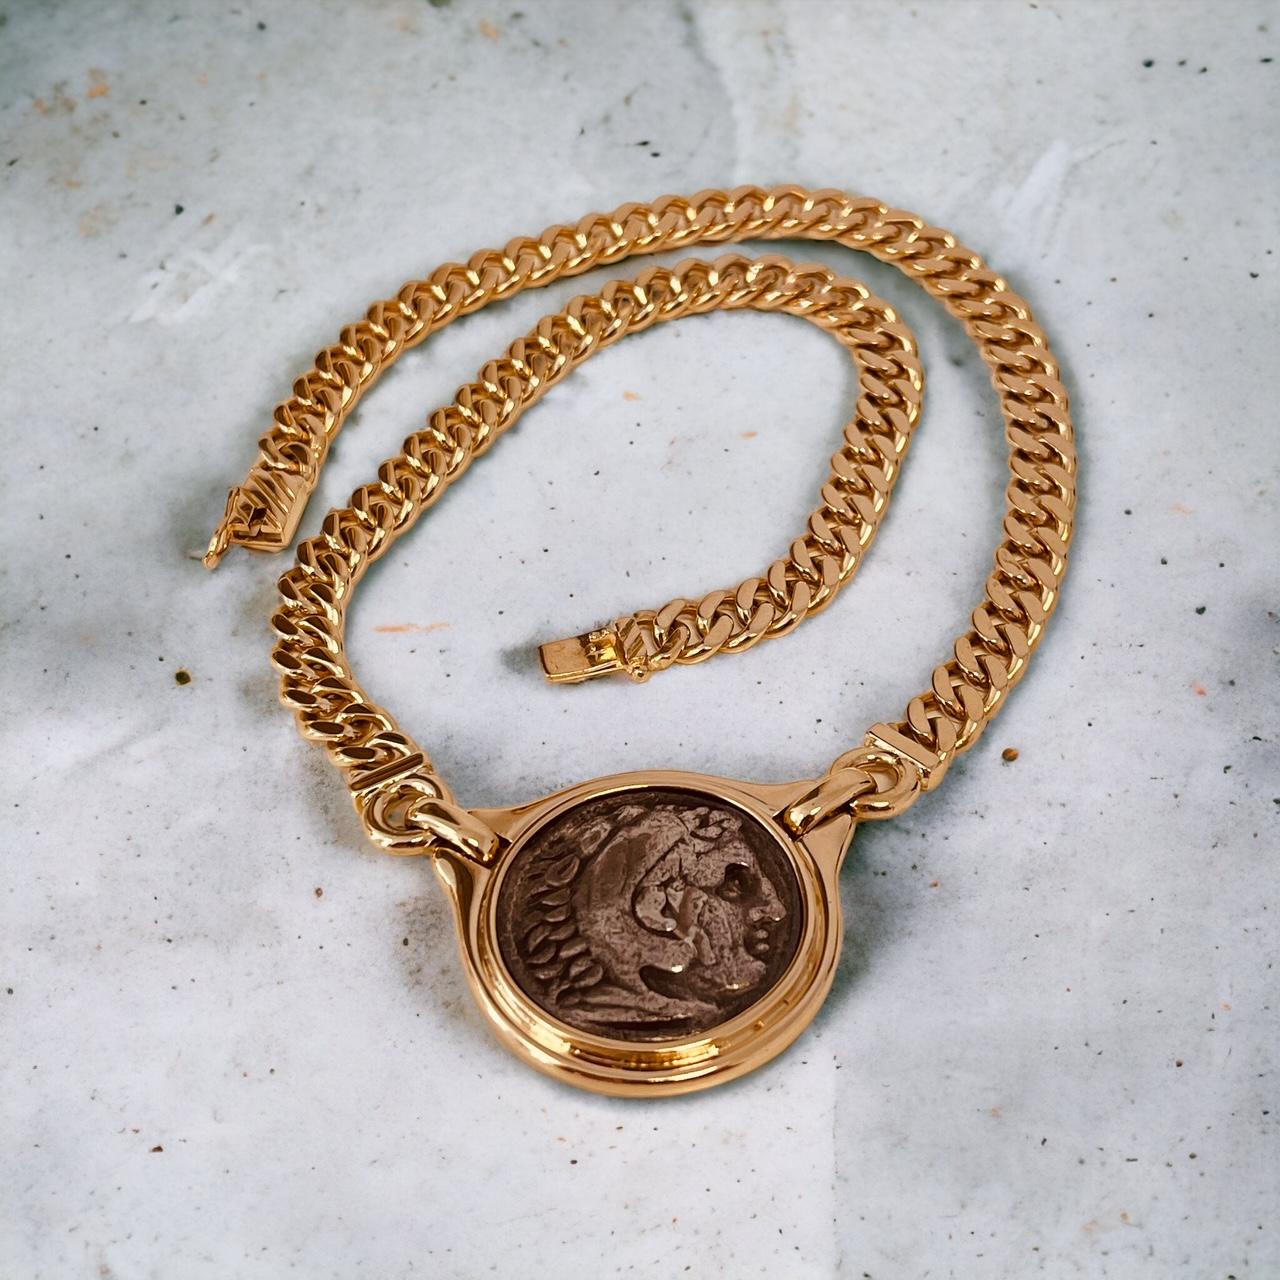 18ct Gold Link Necklace Centring A Reproduction Of An Antique Greek Silver Coin For Sale 1